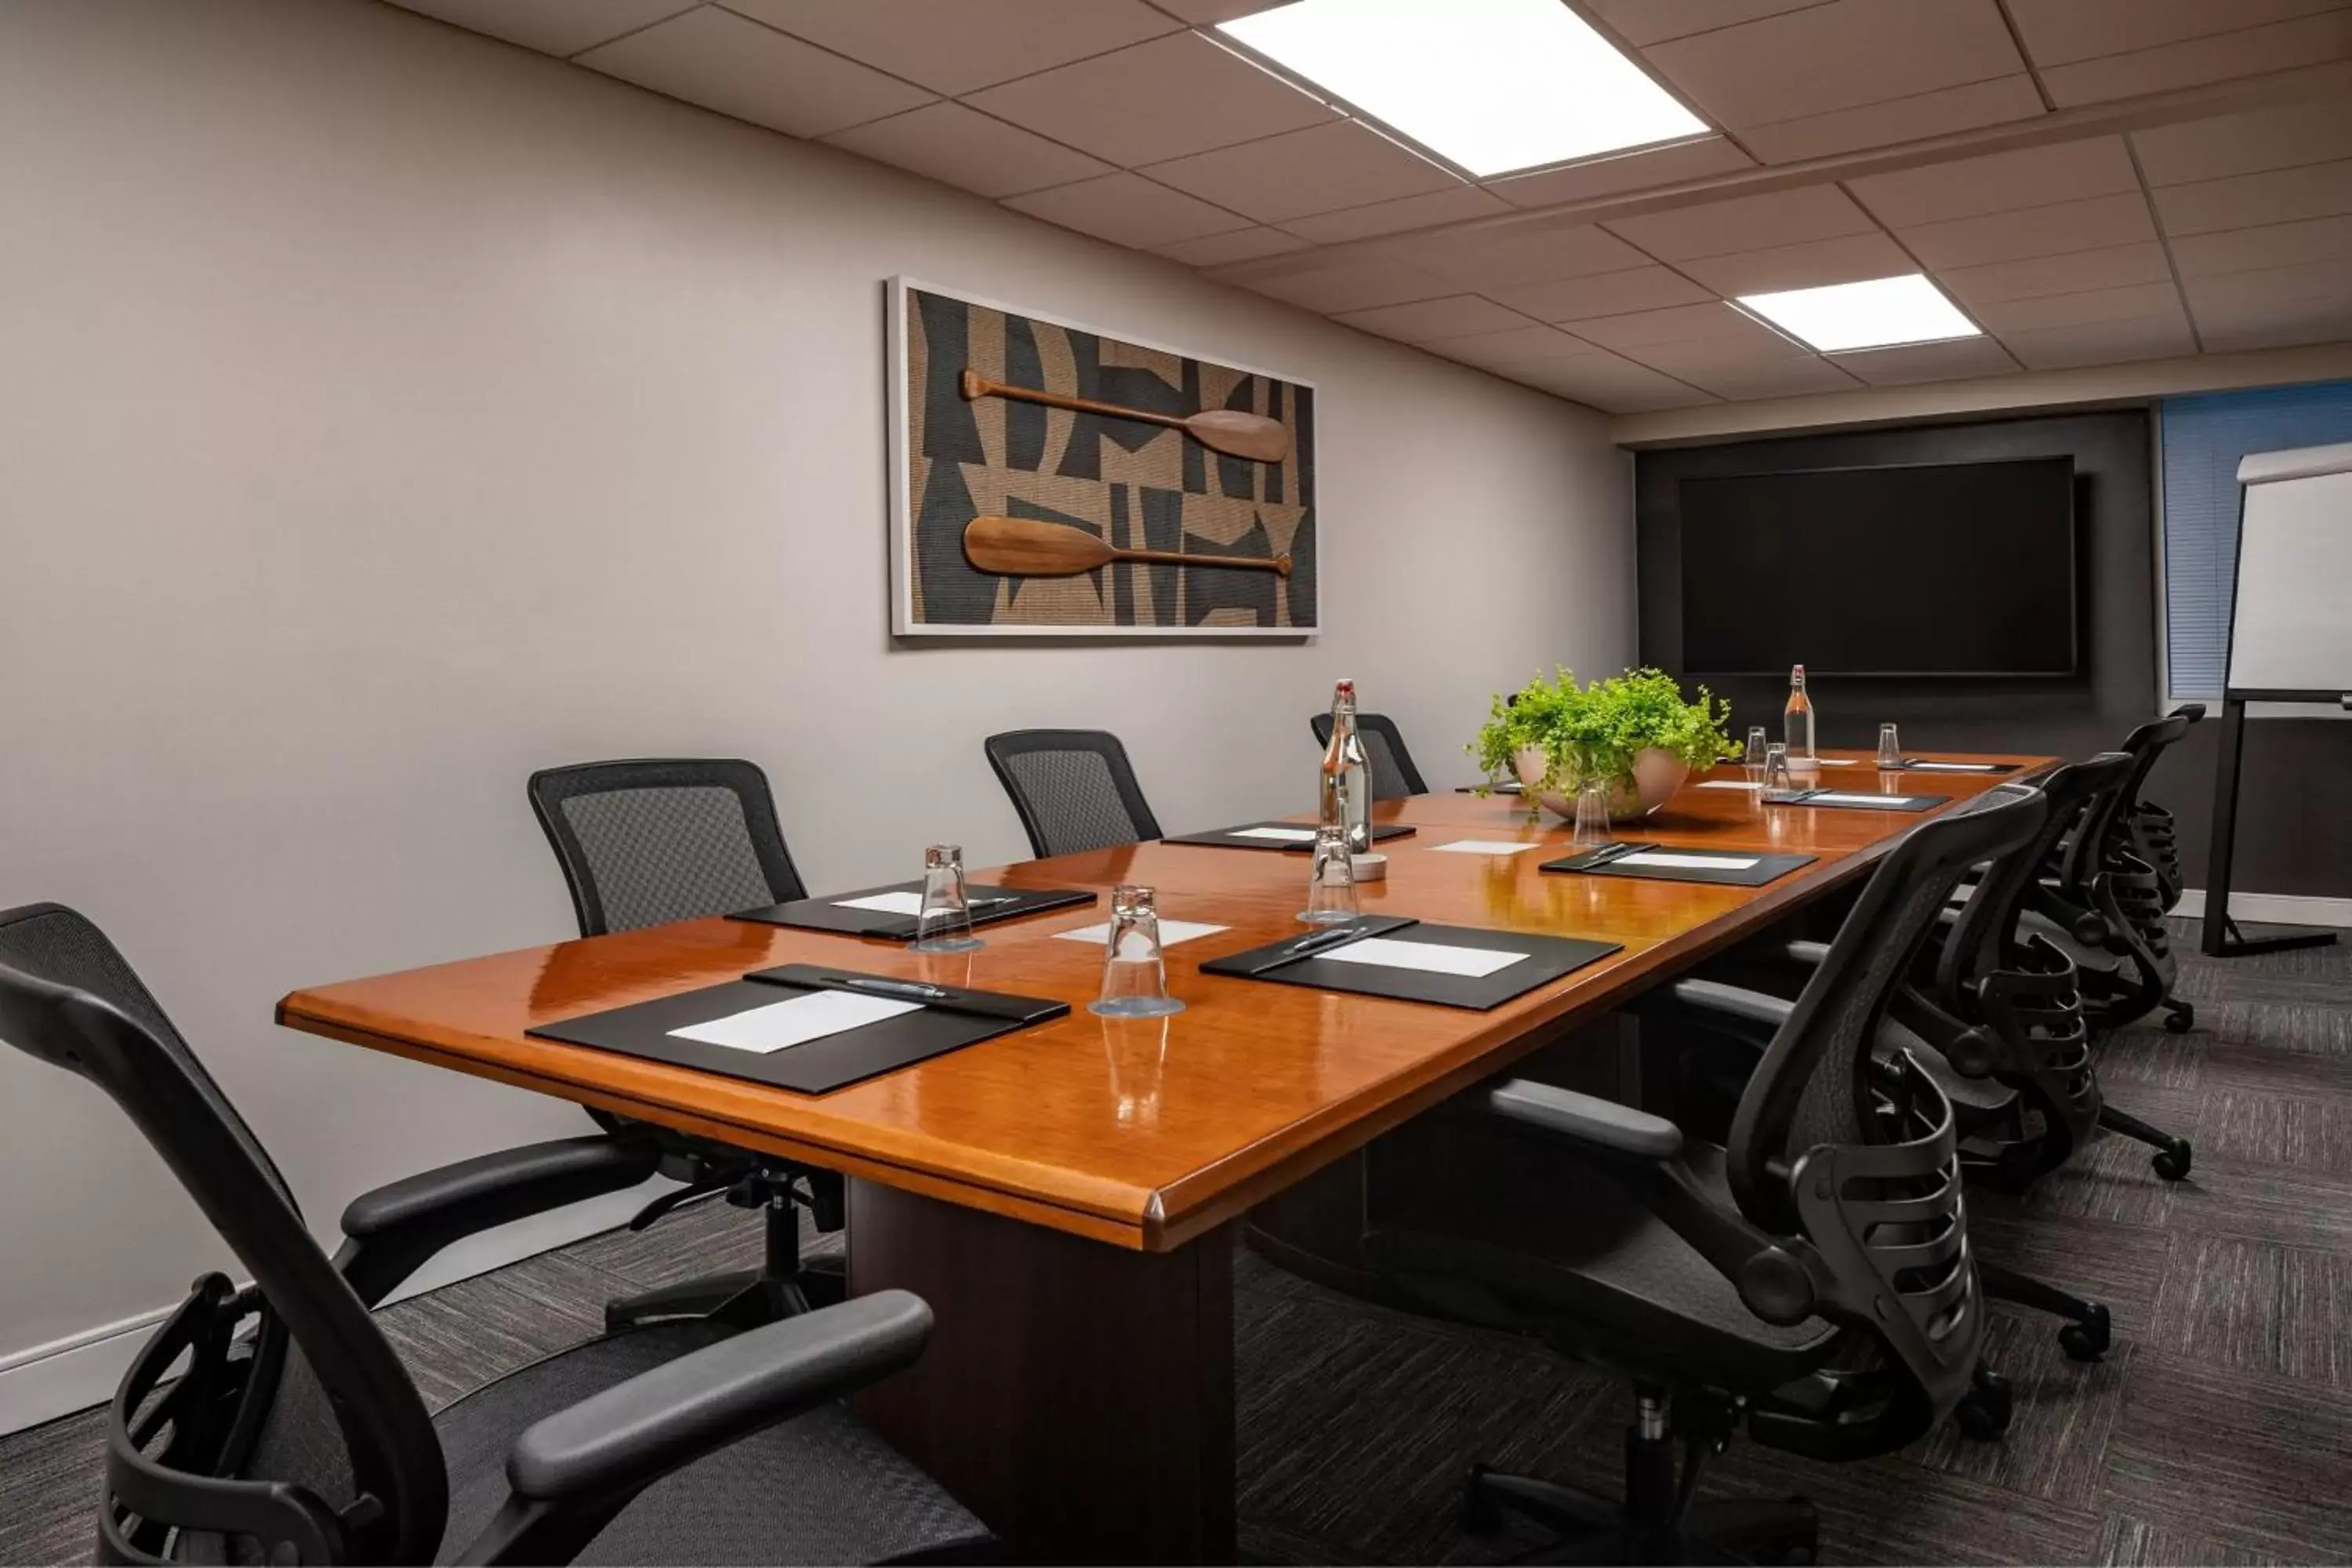 Meeting/conference room in The Westin Fort Lauderdale Beach Resort